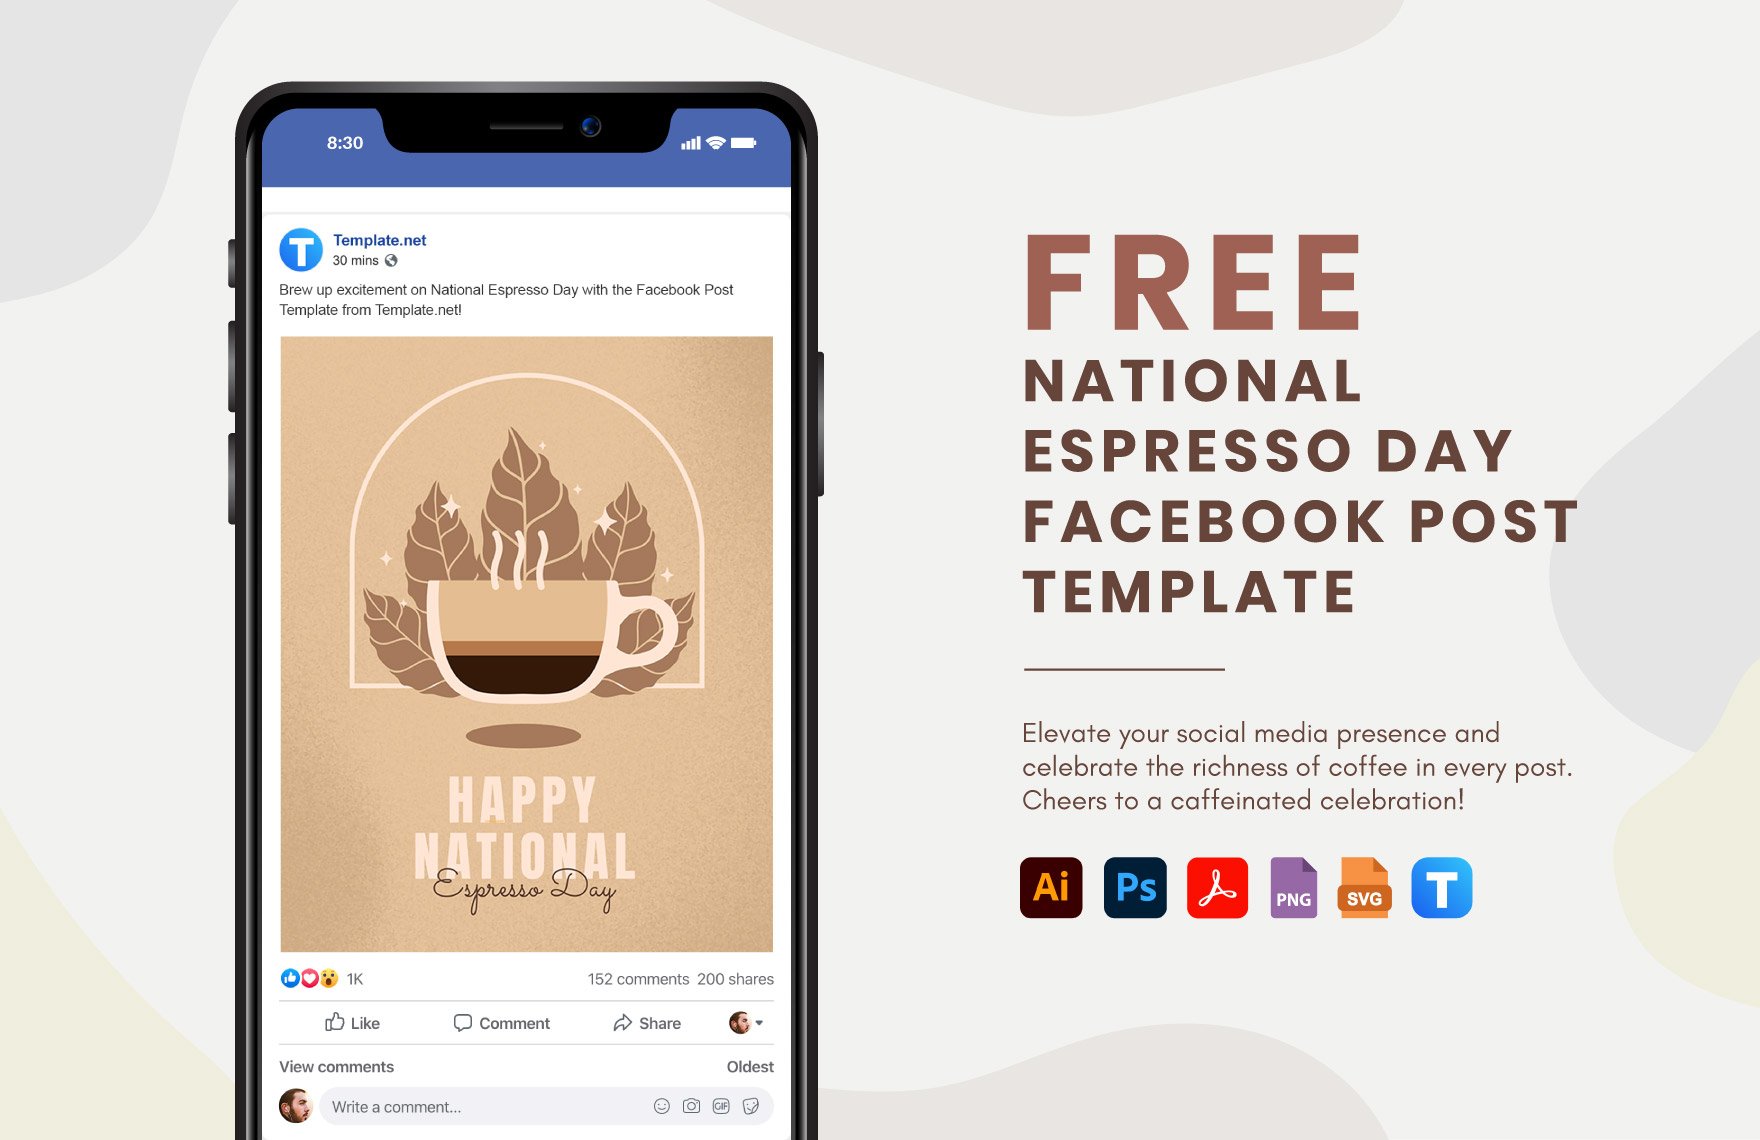 National Espresso Day Facebook Post Template